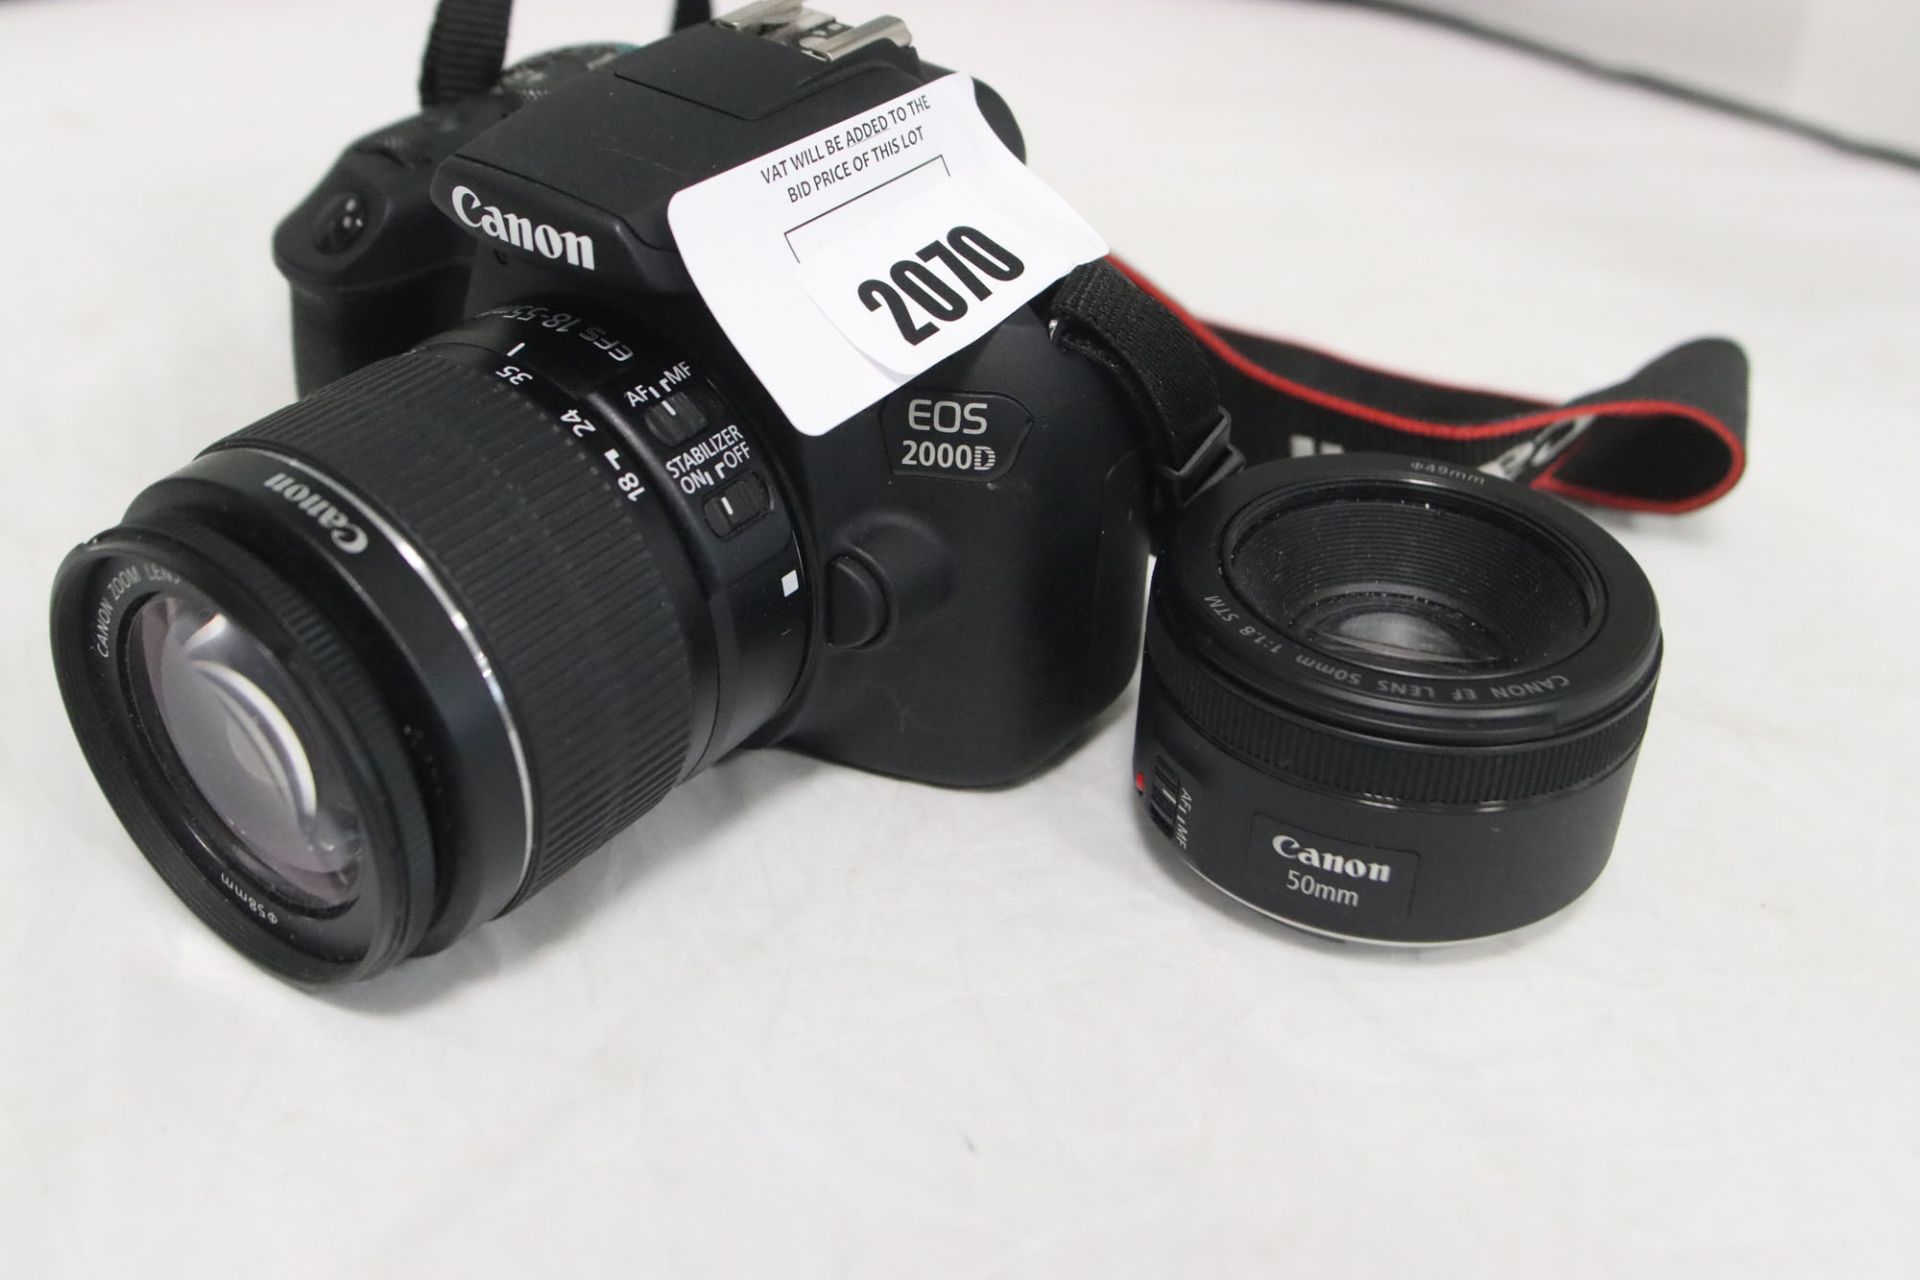 Canon EOS-2000D DSLR camera with EFS 18-55mm lens, EF50mm lens and battery charger